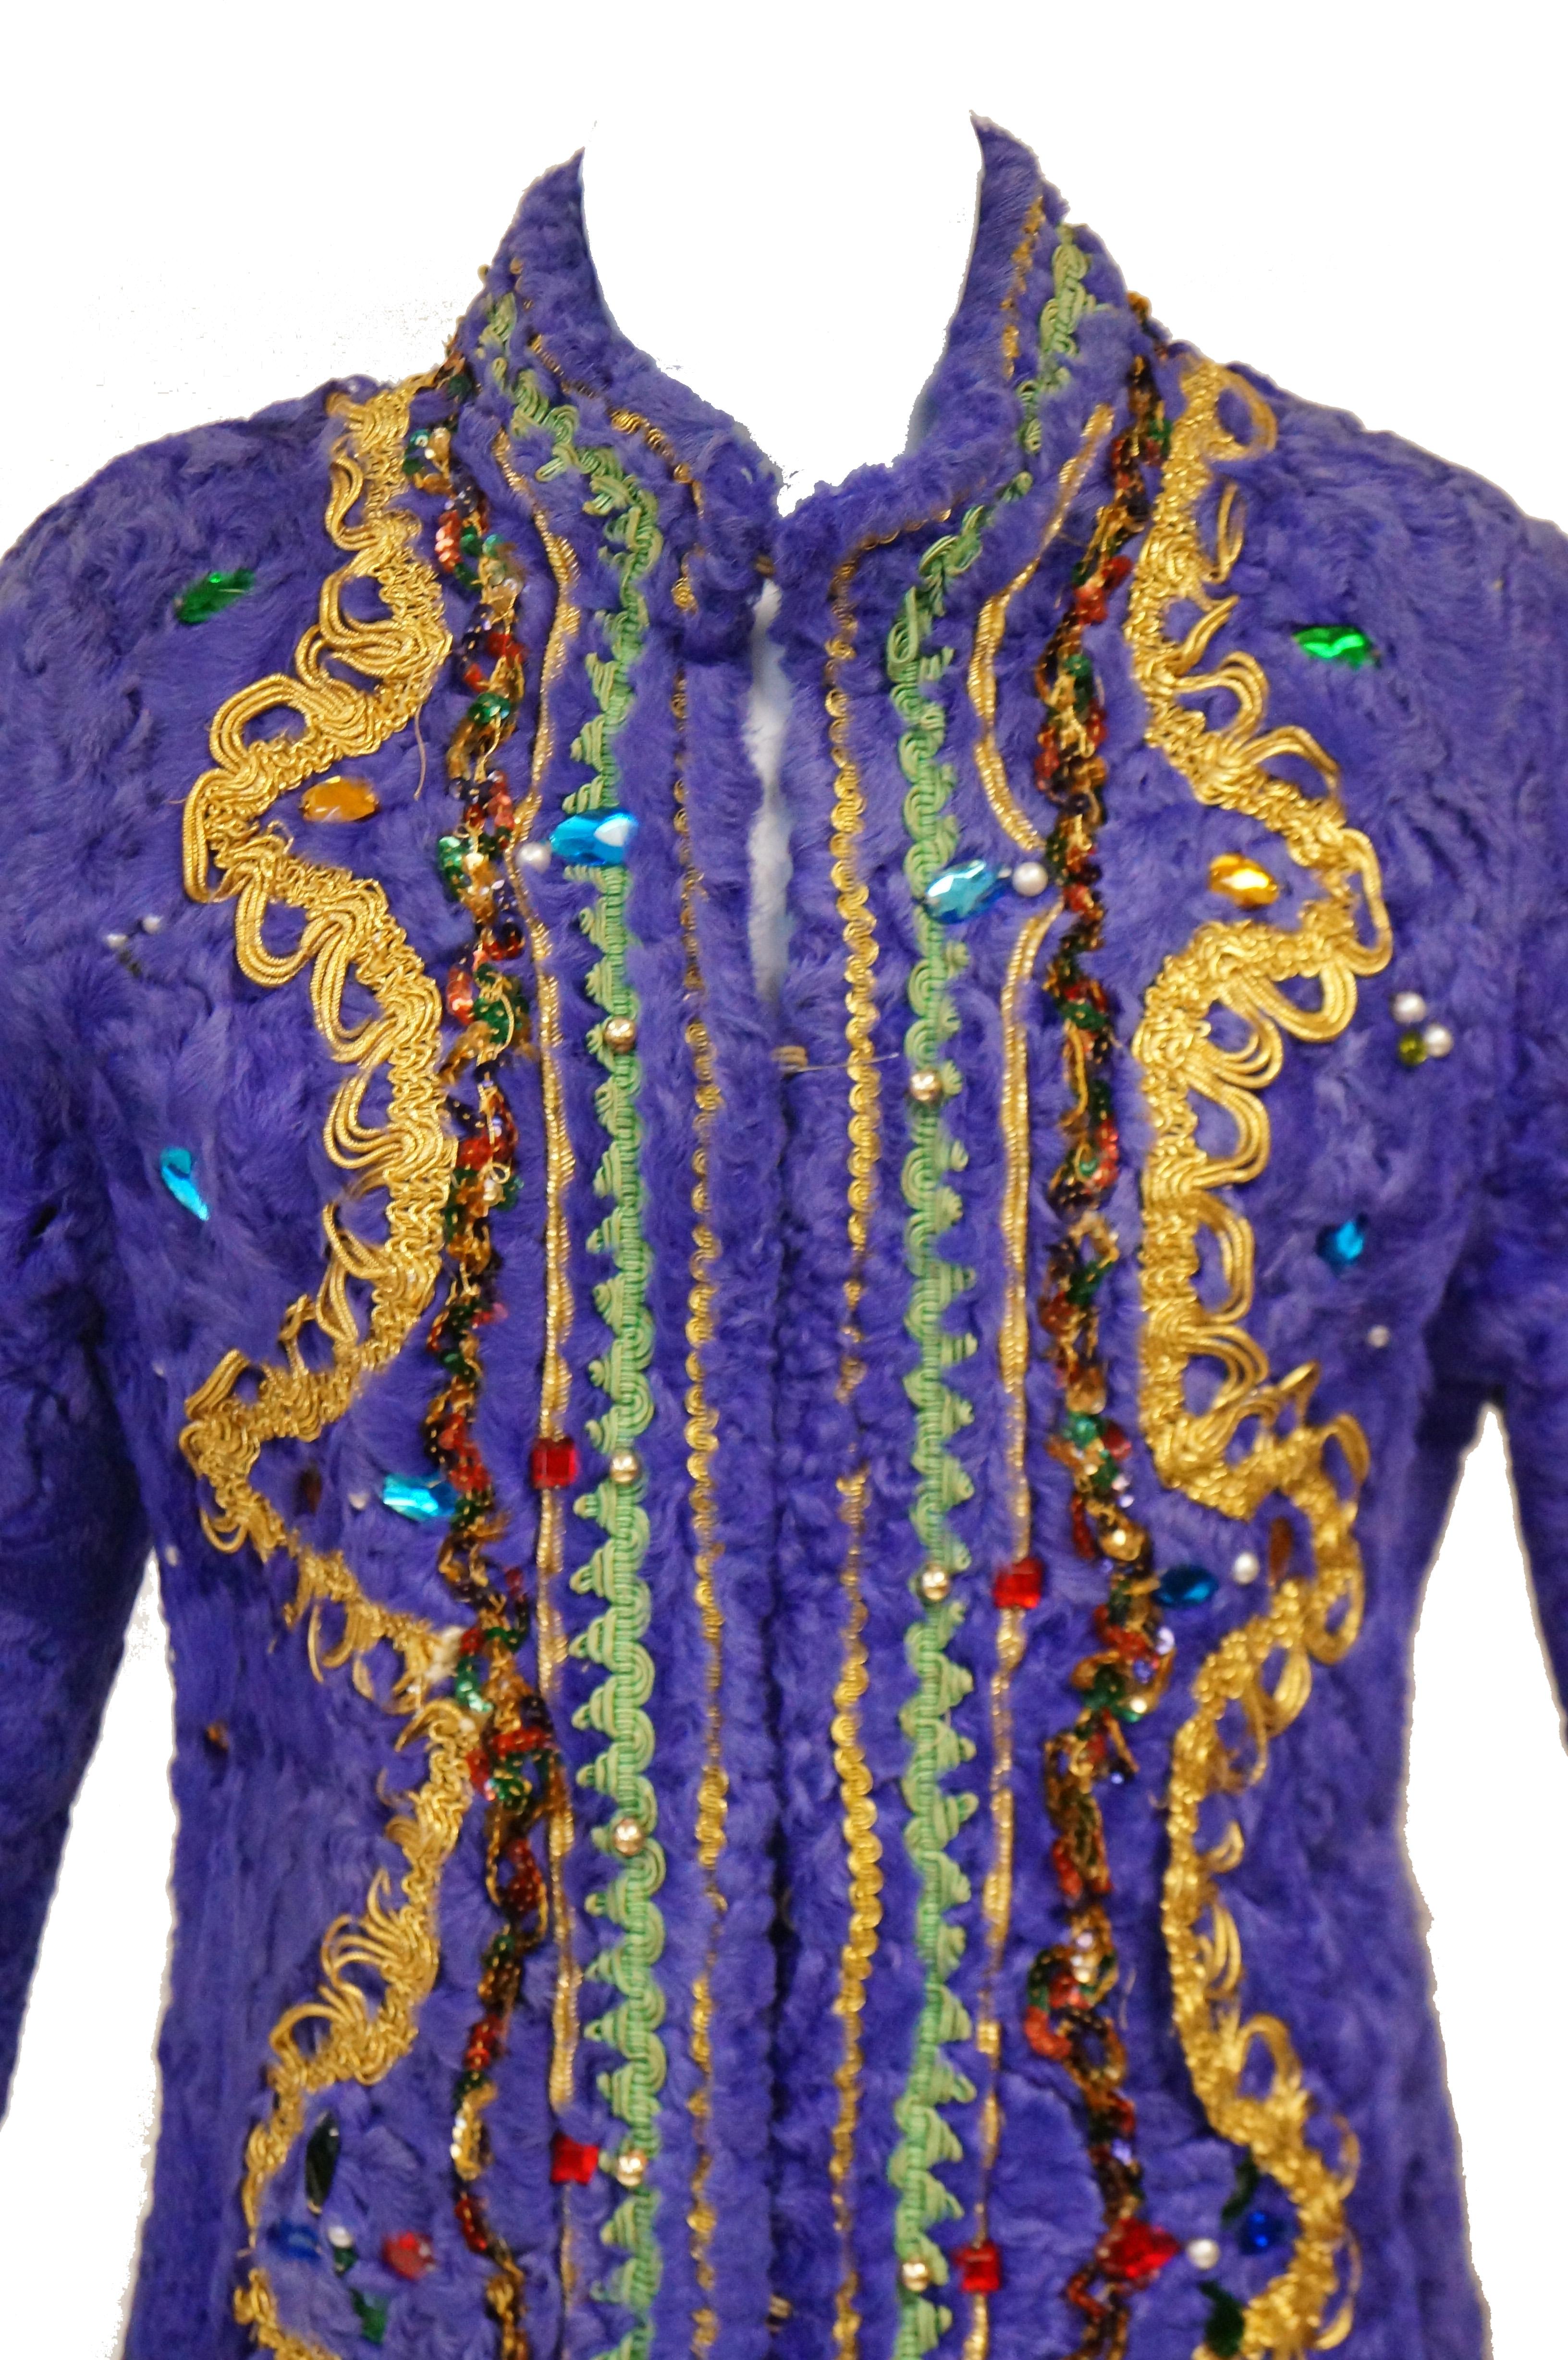 Have you ever seen such an outrageous coat?! This purple - dyed Persian lamb coat is full length, with a mandarin collar, and long sleeves. The coat is ornamented with gold and pistachio green passementerie, coils of red, orange, and green sequins,